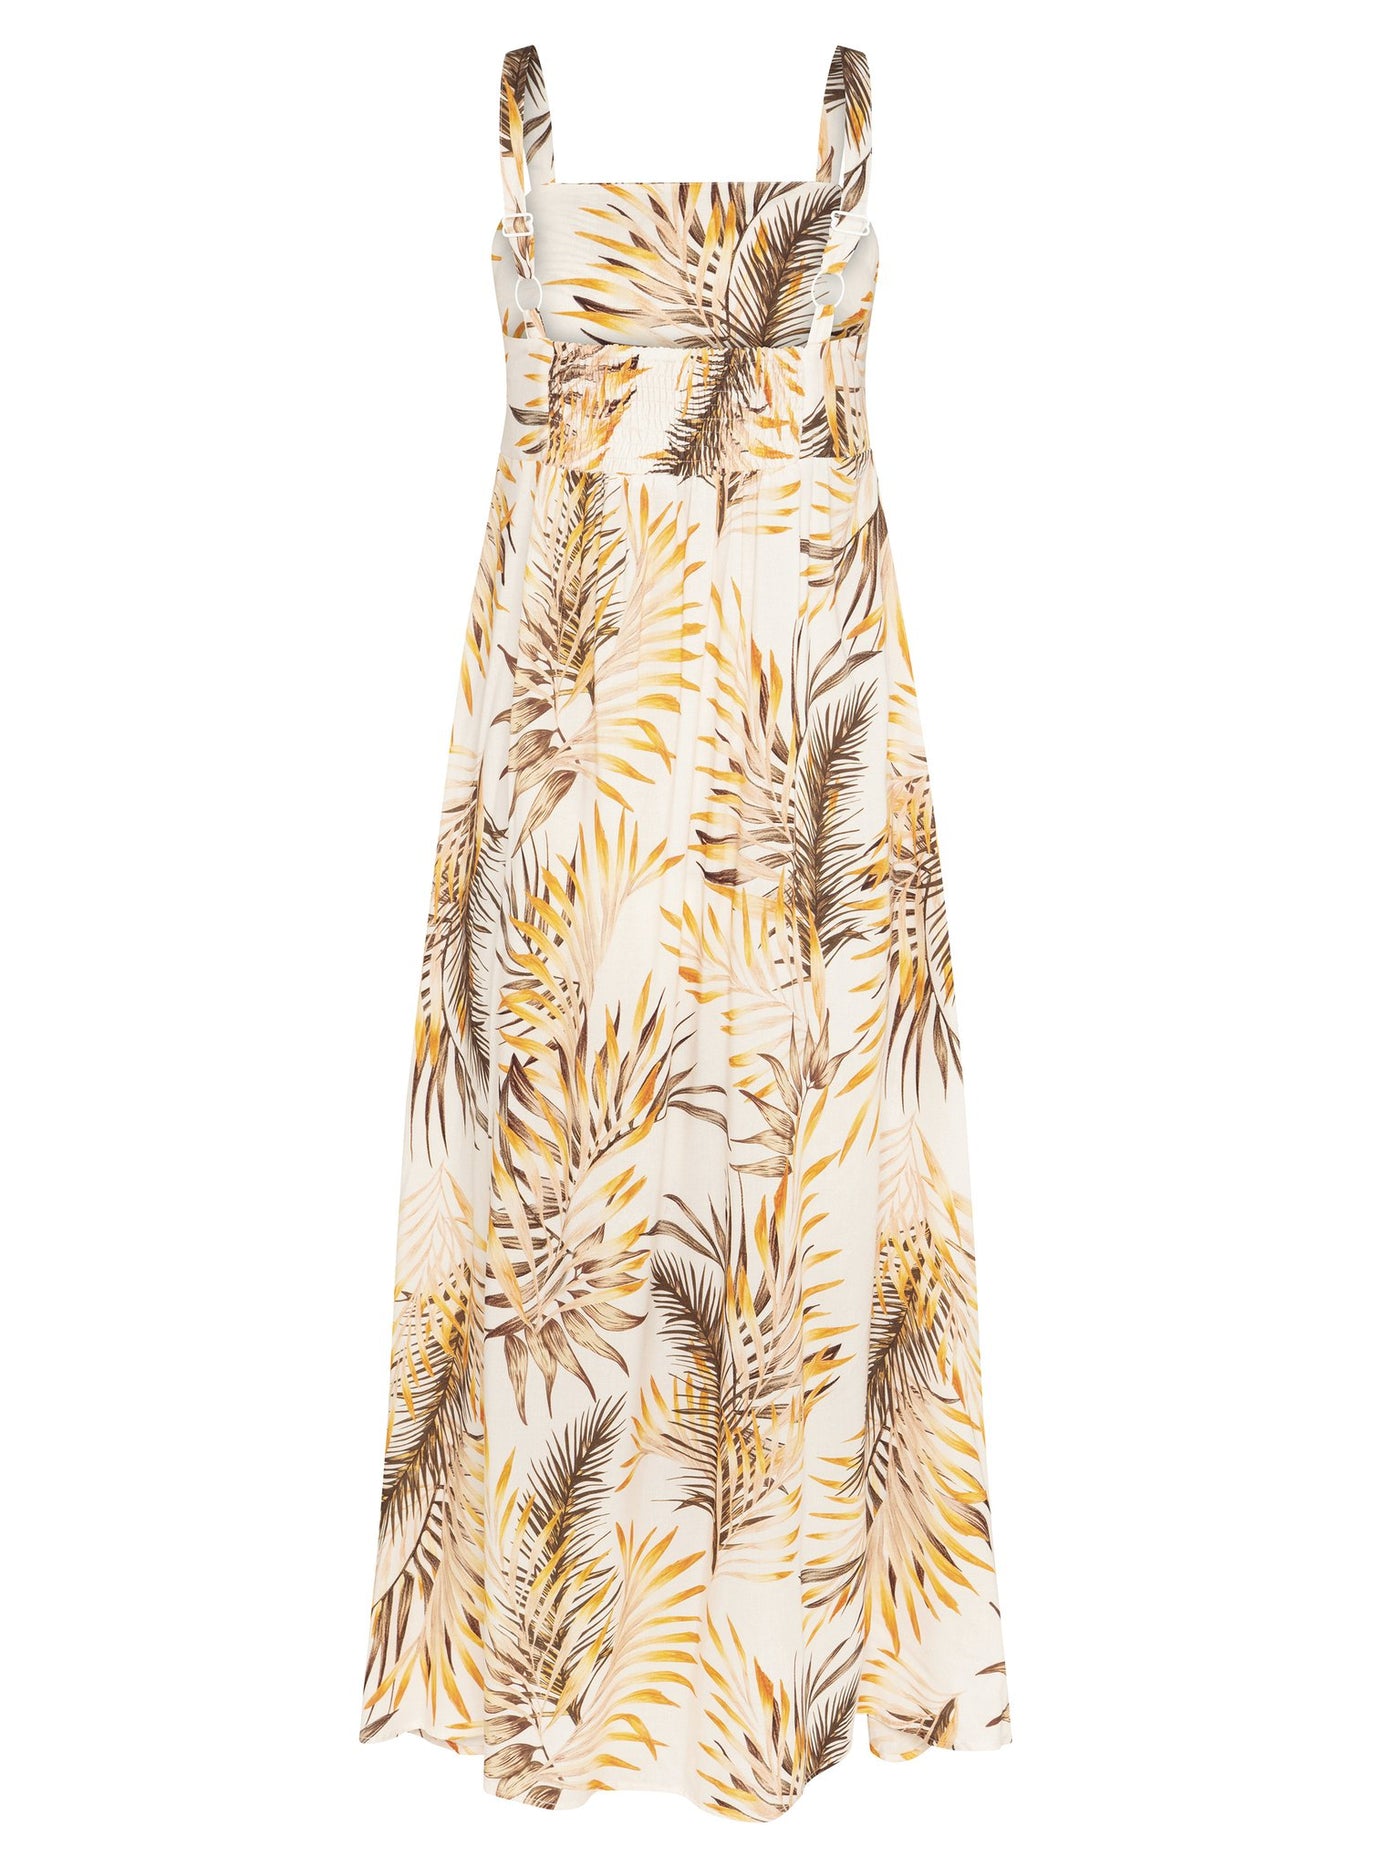 Golden Leaves Print Wide Strap Maxi Dress, Adjustable Straps, Shirred Elastic Panel At Back, Inverted Pleat Under Bodice, Ankle Length, Hand Drawn Exclusive Print, 100% rayon, Designed in Australia